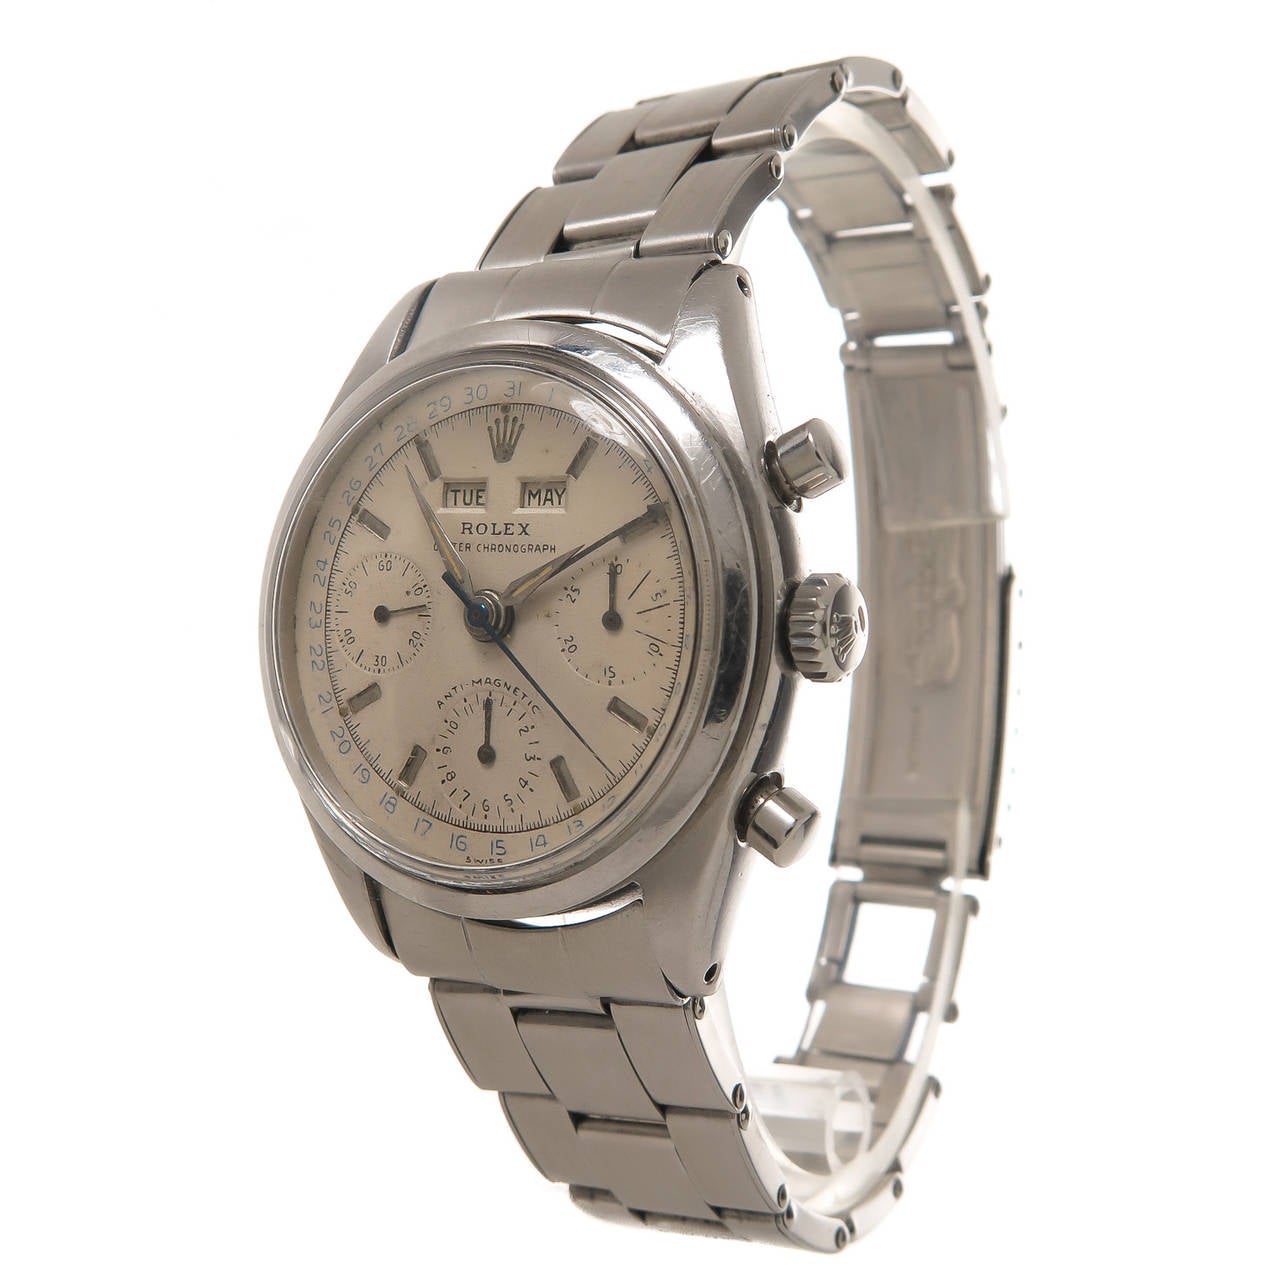 Circa 1945 Rolex  Reference 6236 ( Jean Claude Killy ) Triple Calendar, Anti Magnetic Chronograph. 35 MM 2 piece Stainless Steel Water Proof Case, Manual wind Movement. 3 Register Chronograph functions, Day and Date Apertures, white Dial with Blue